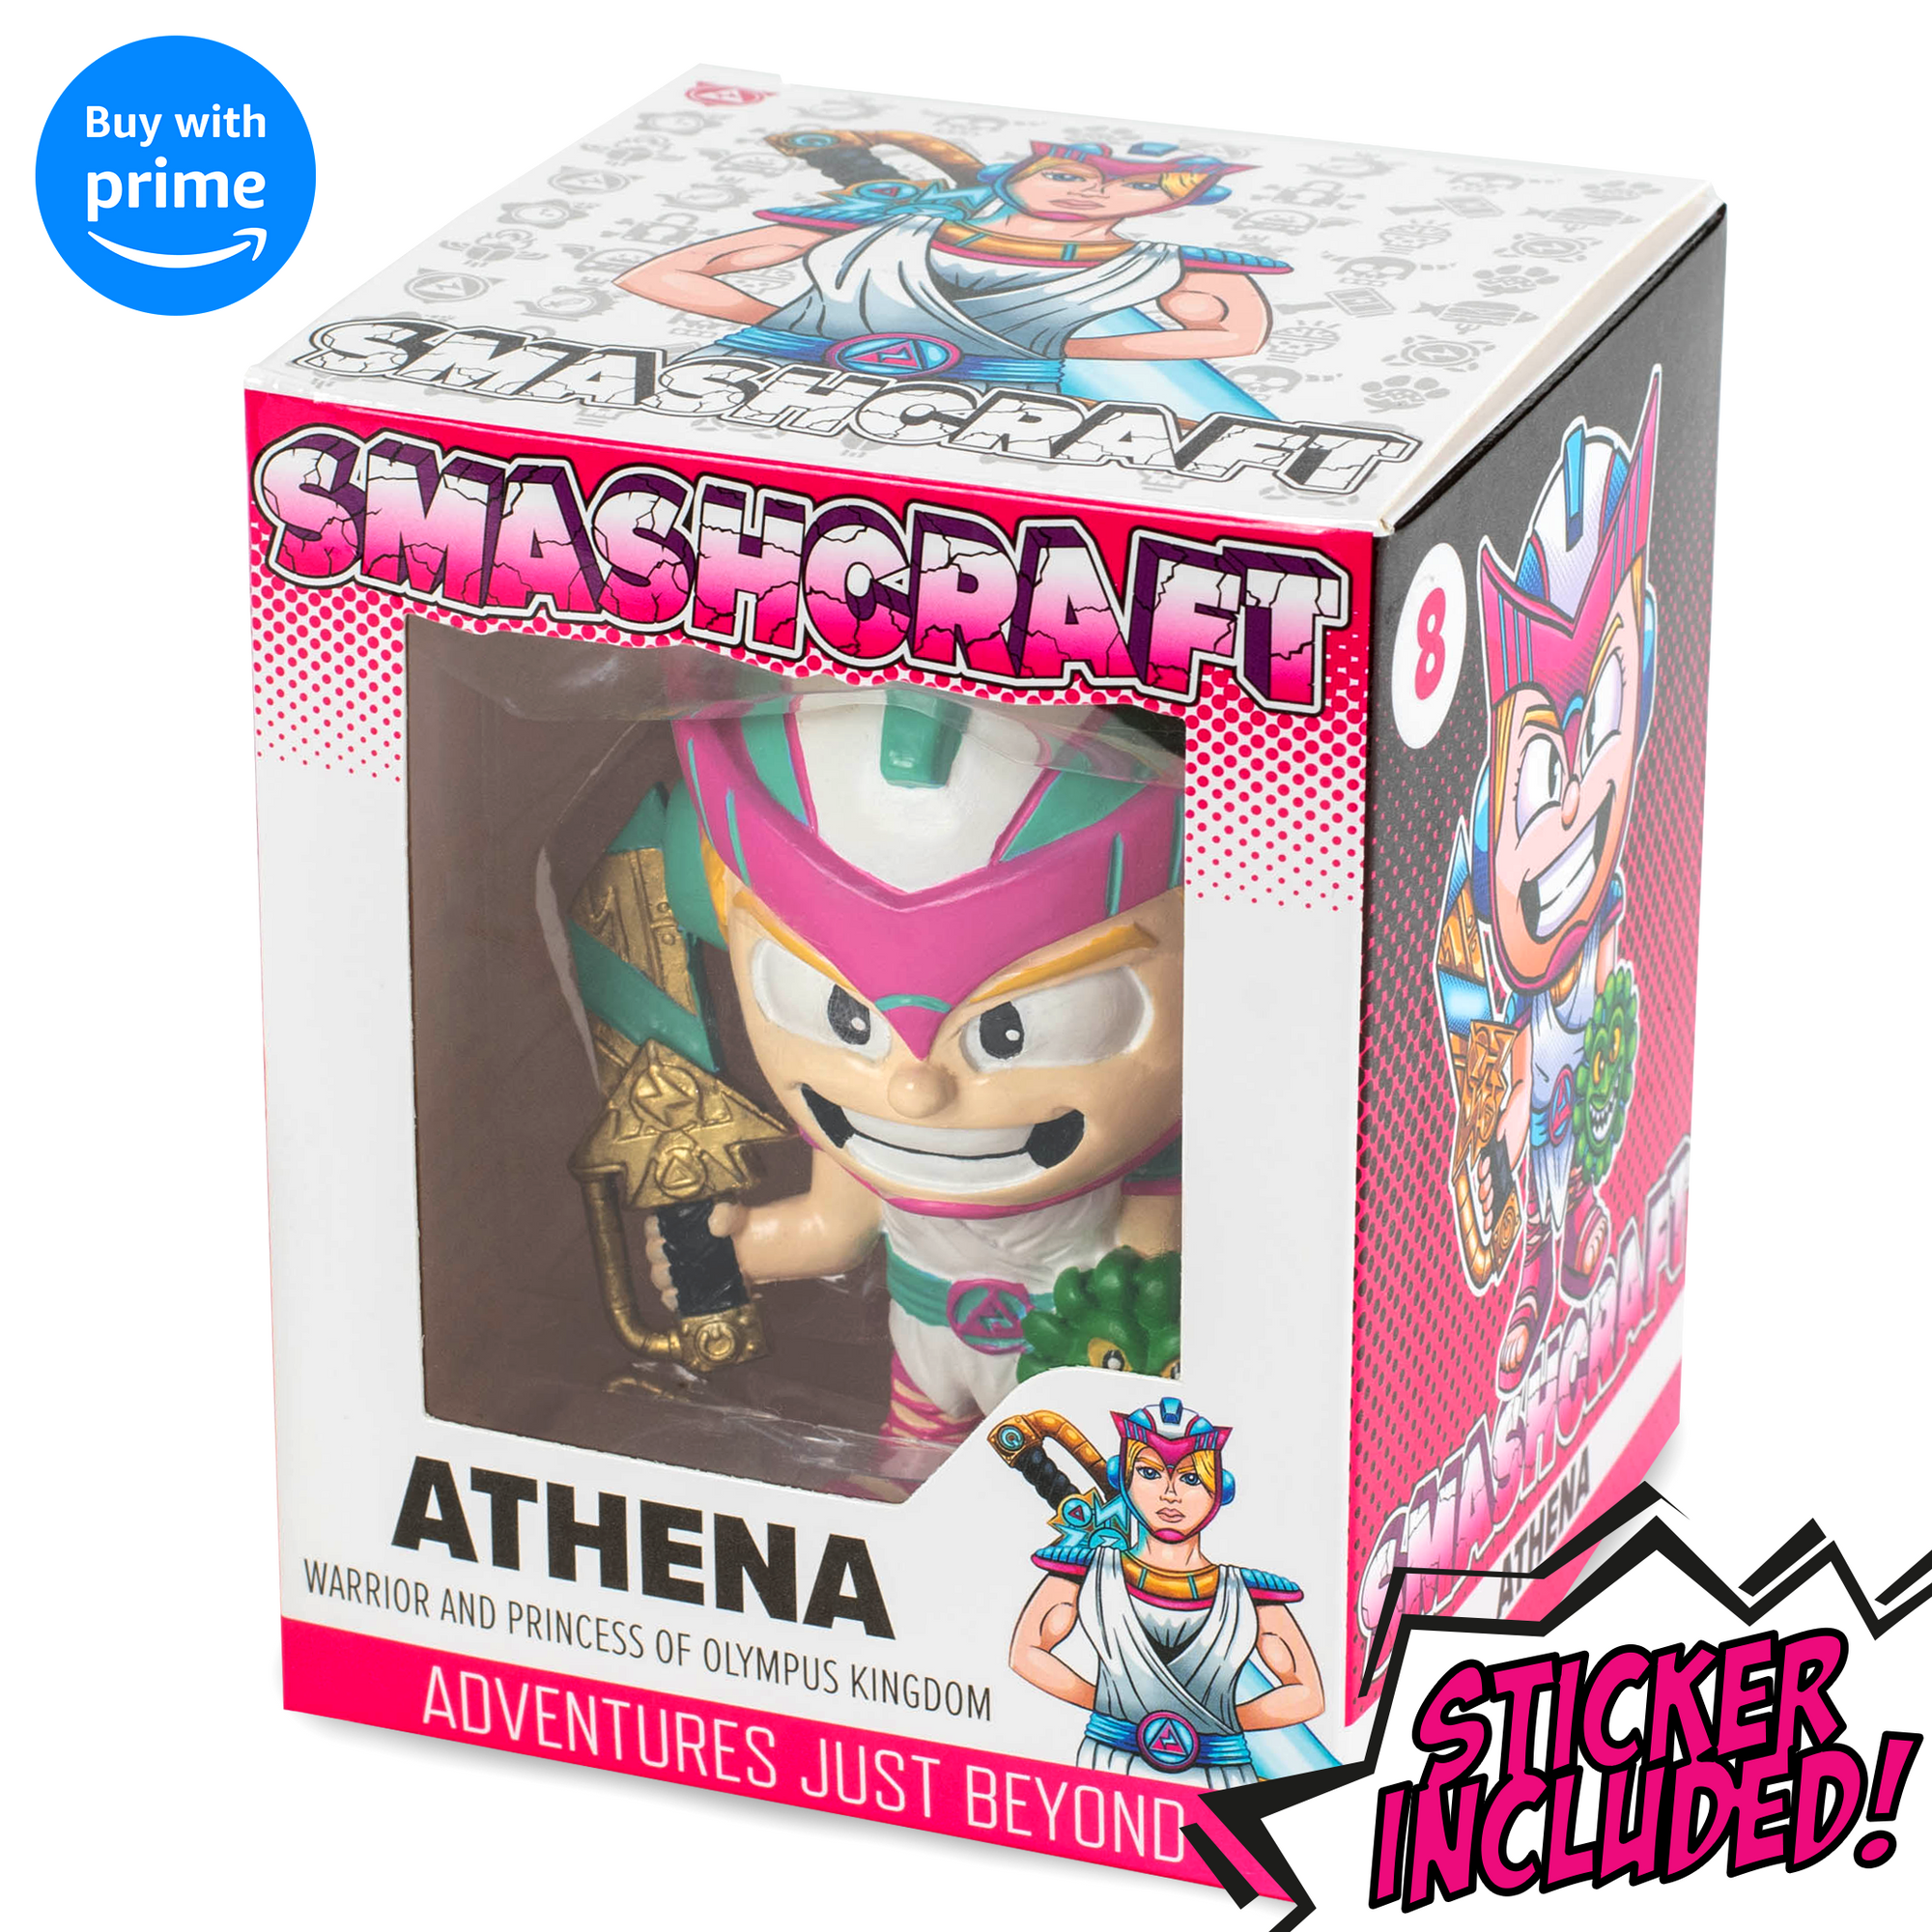 Smashcraft Athena collectors box, with back story and memorabilia Greek character sticker